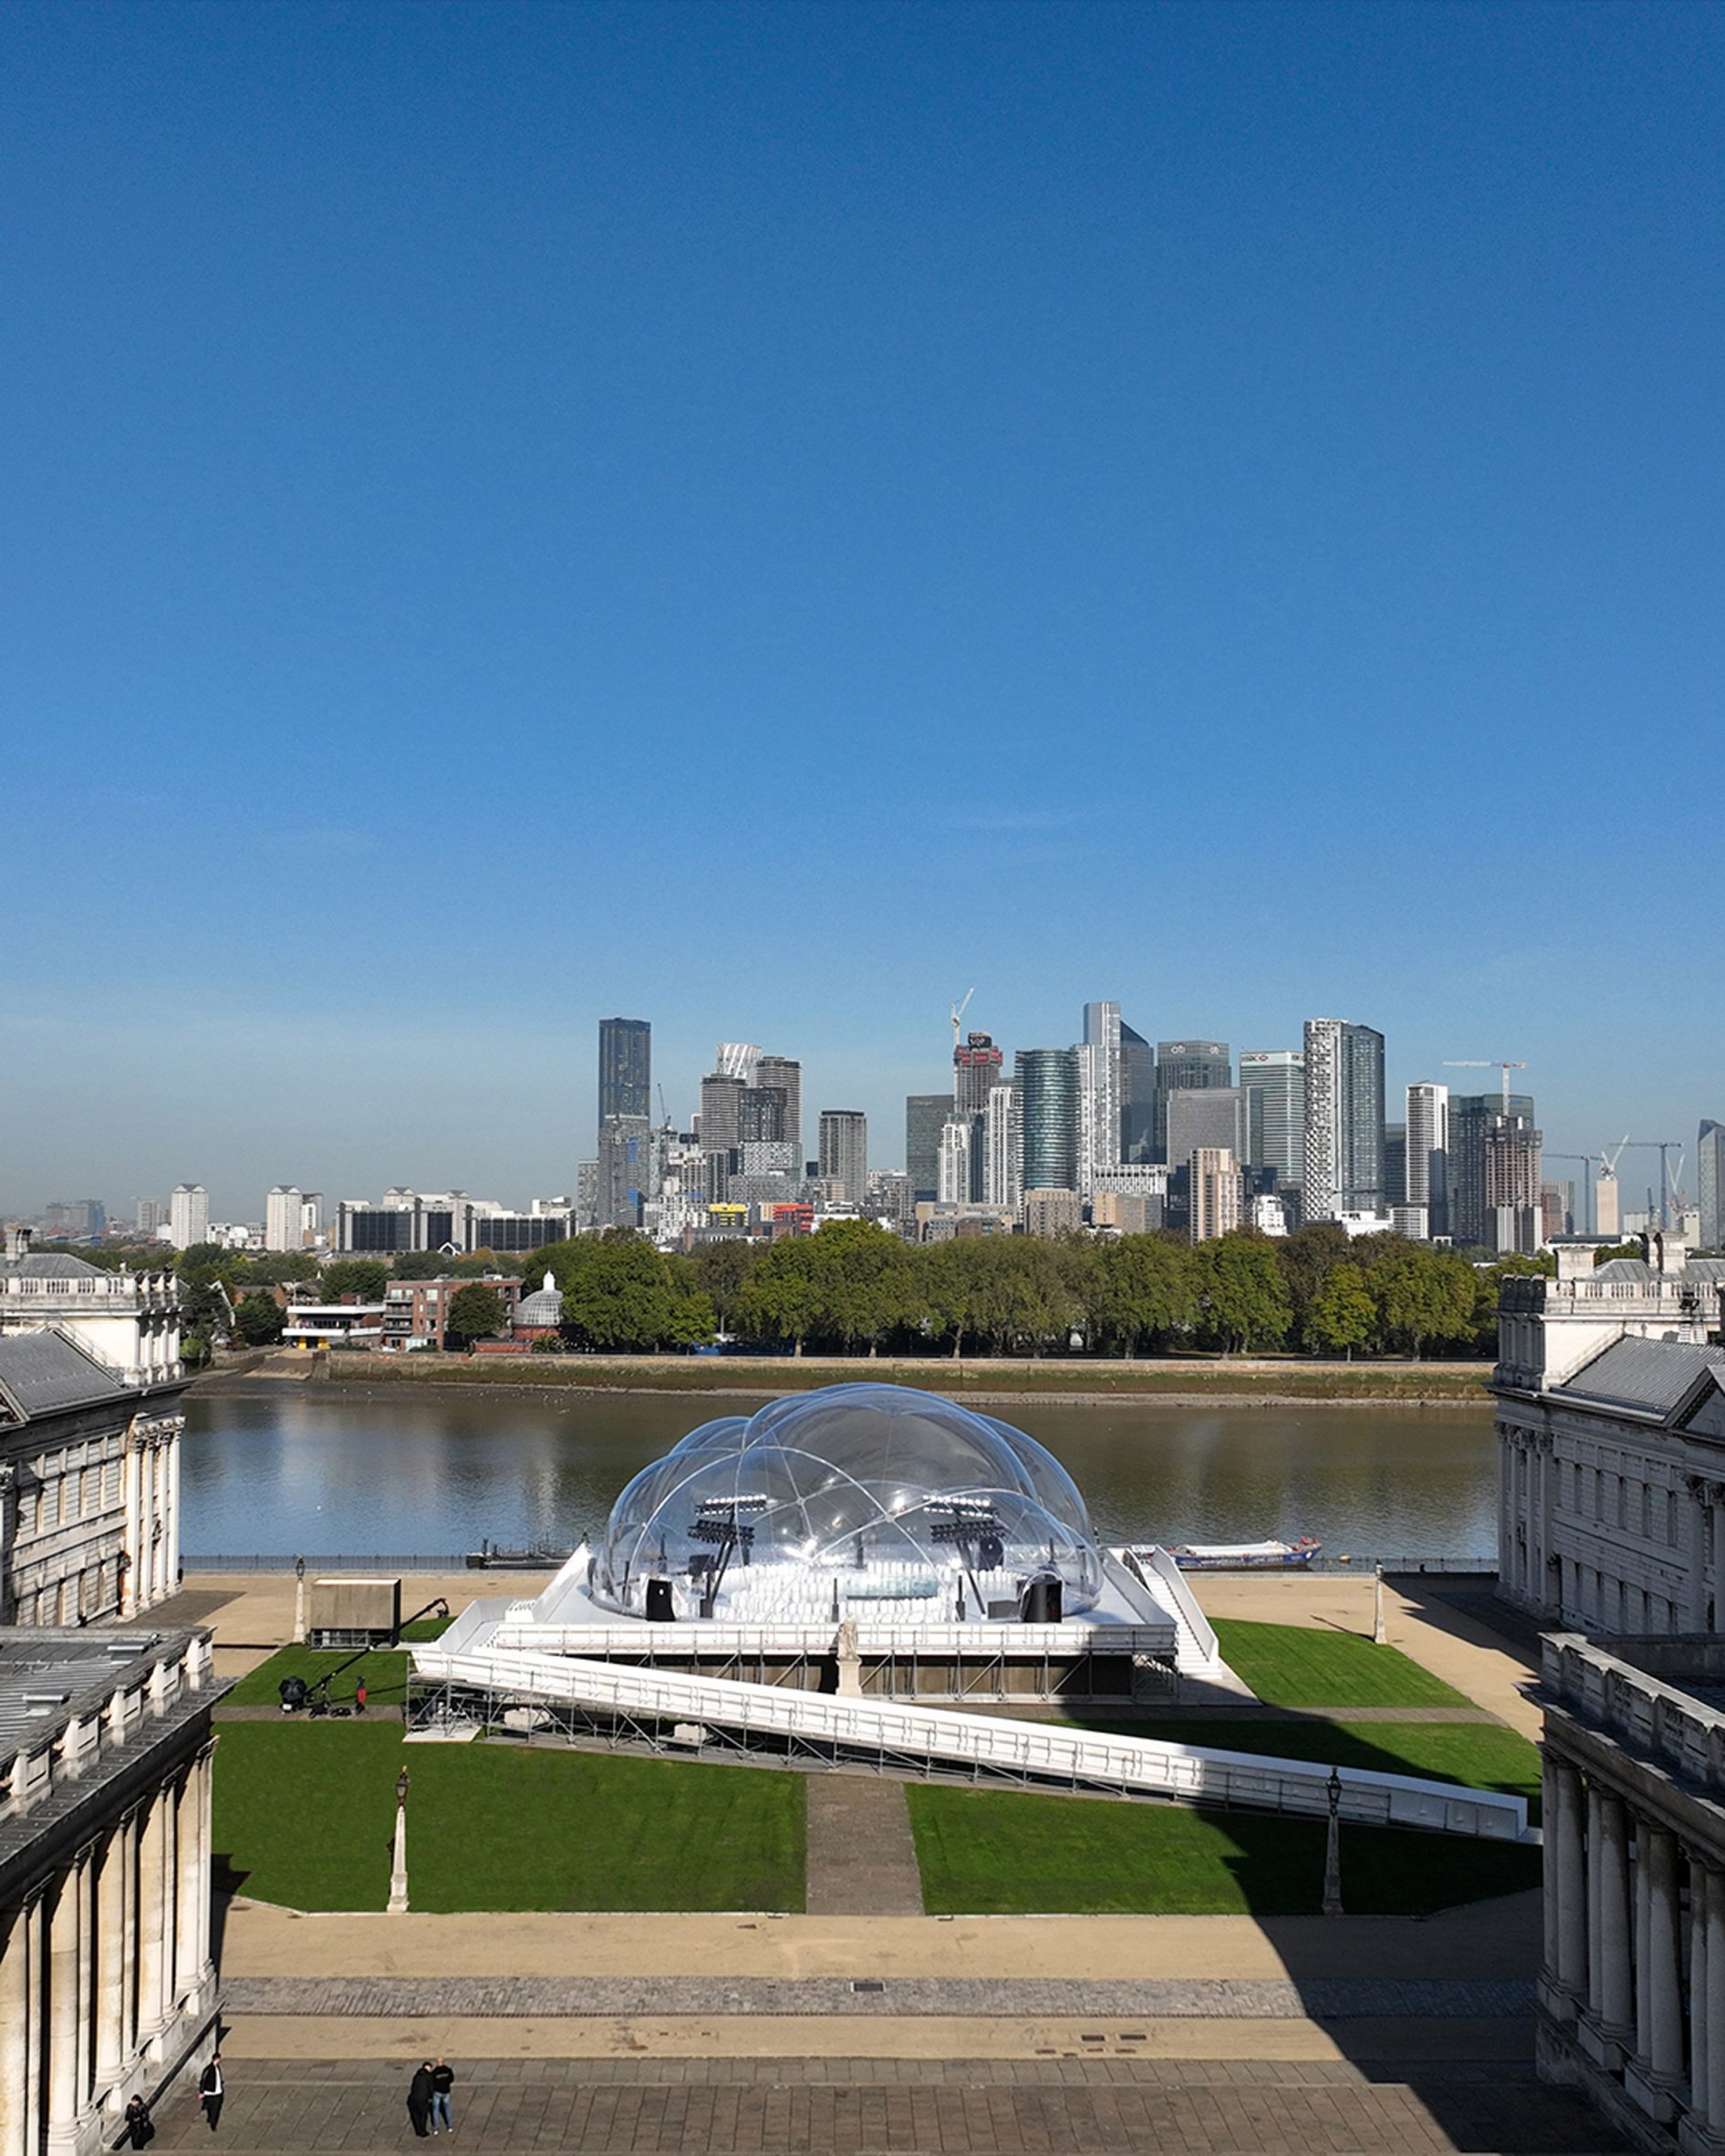 Image of the inflatable show space in front of the Thames River and London skyline